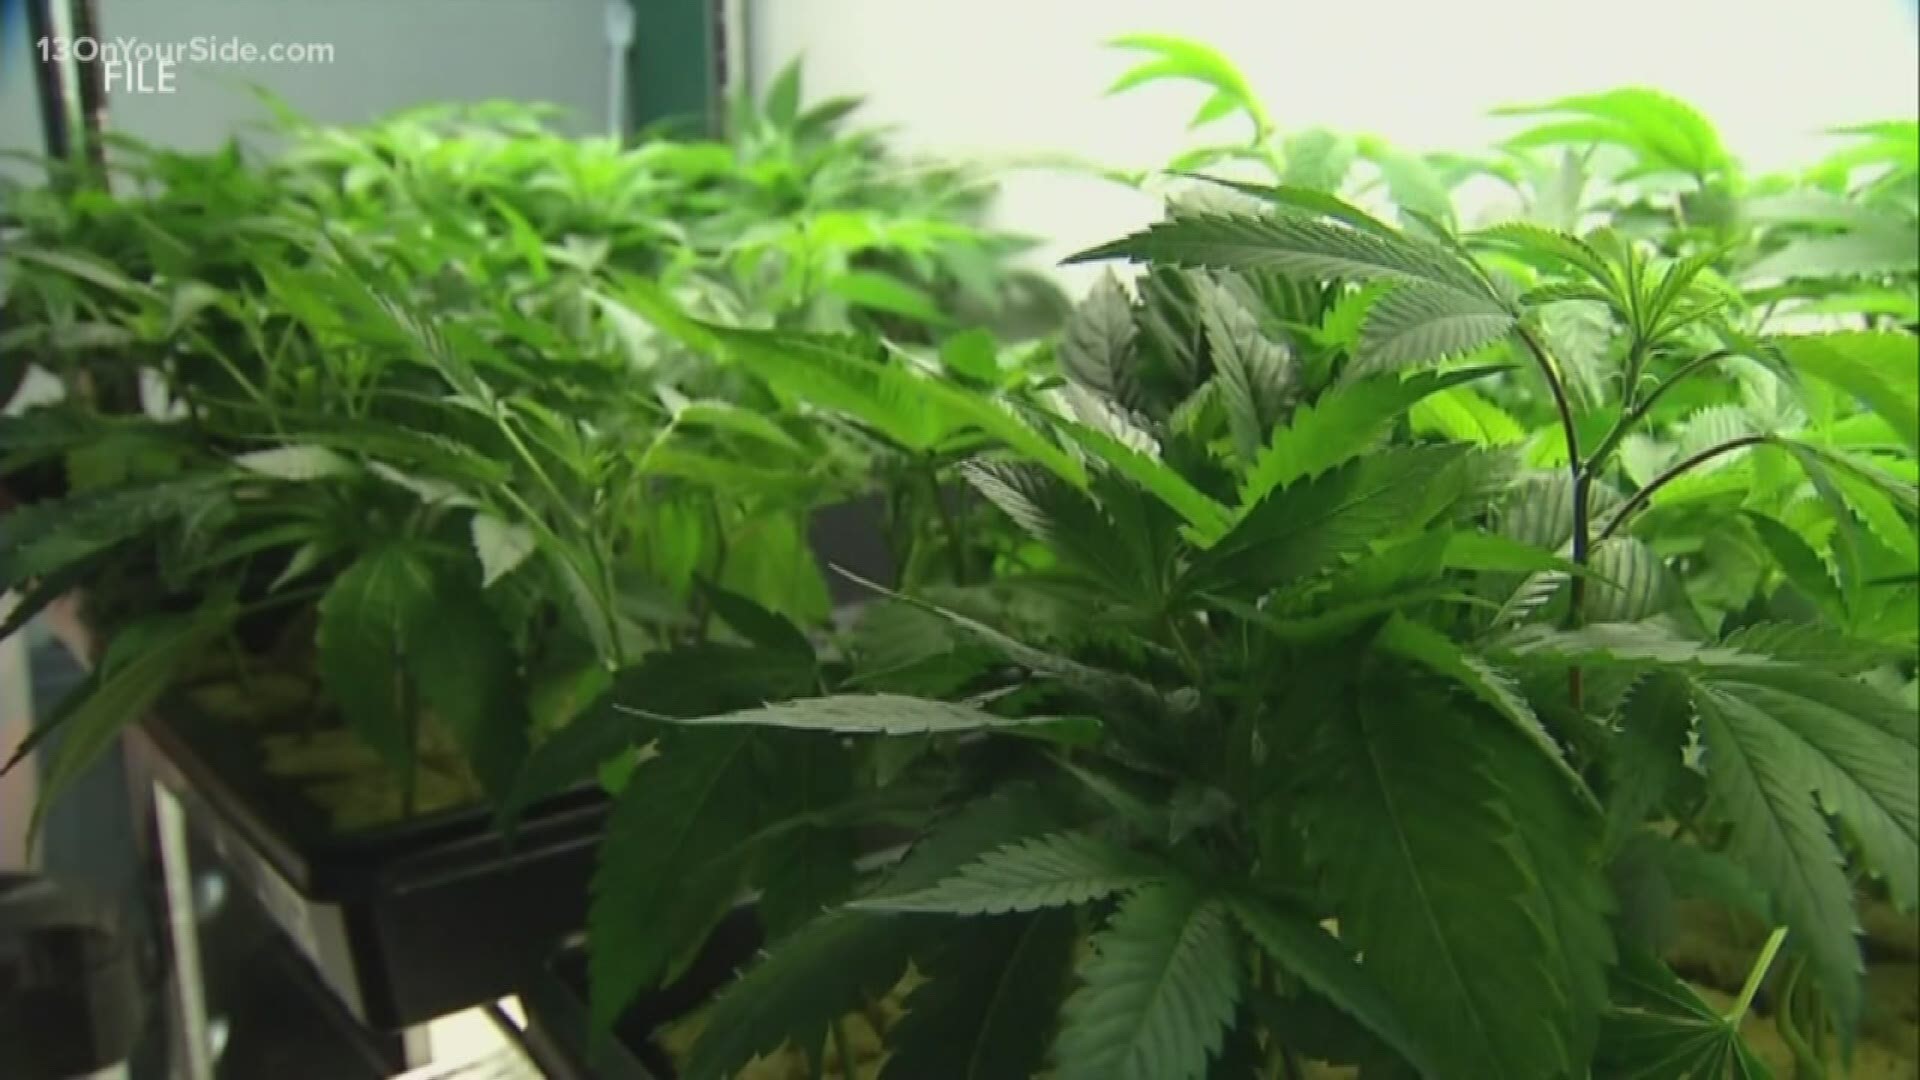 Recreational marijuana was legalized across the state in November, but the industry is still getting off the ground.